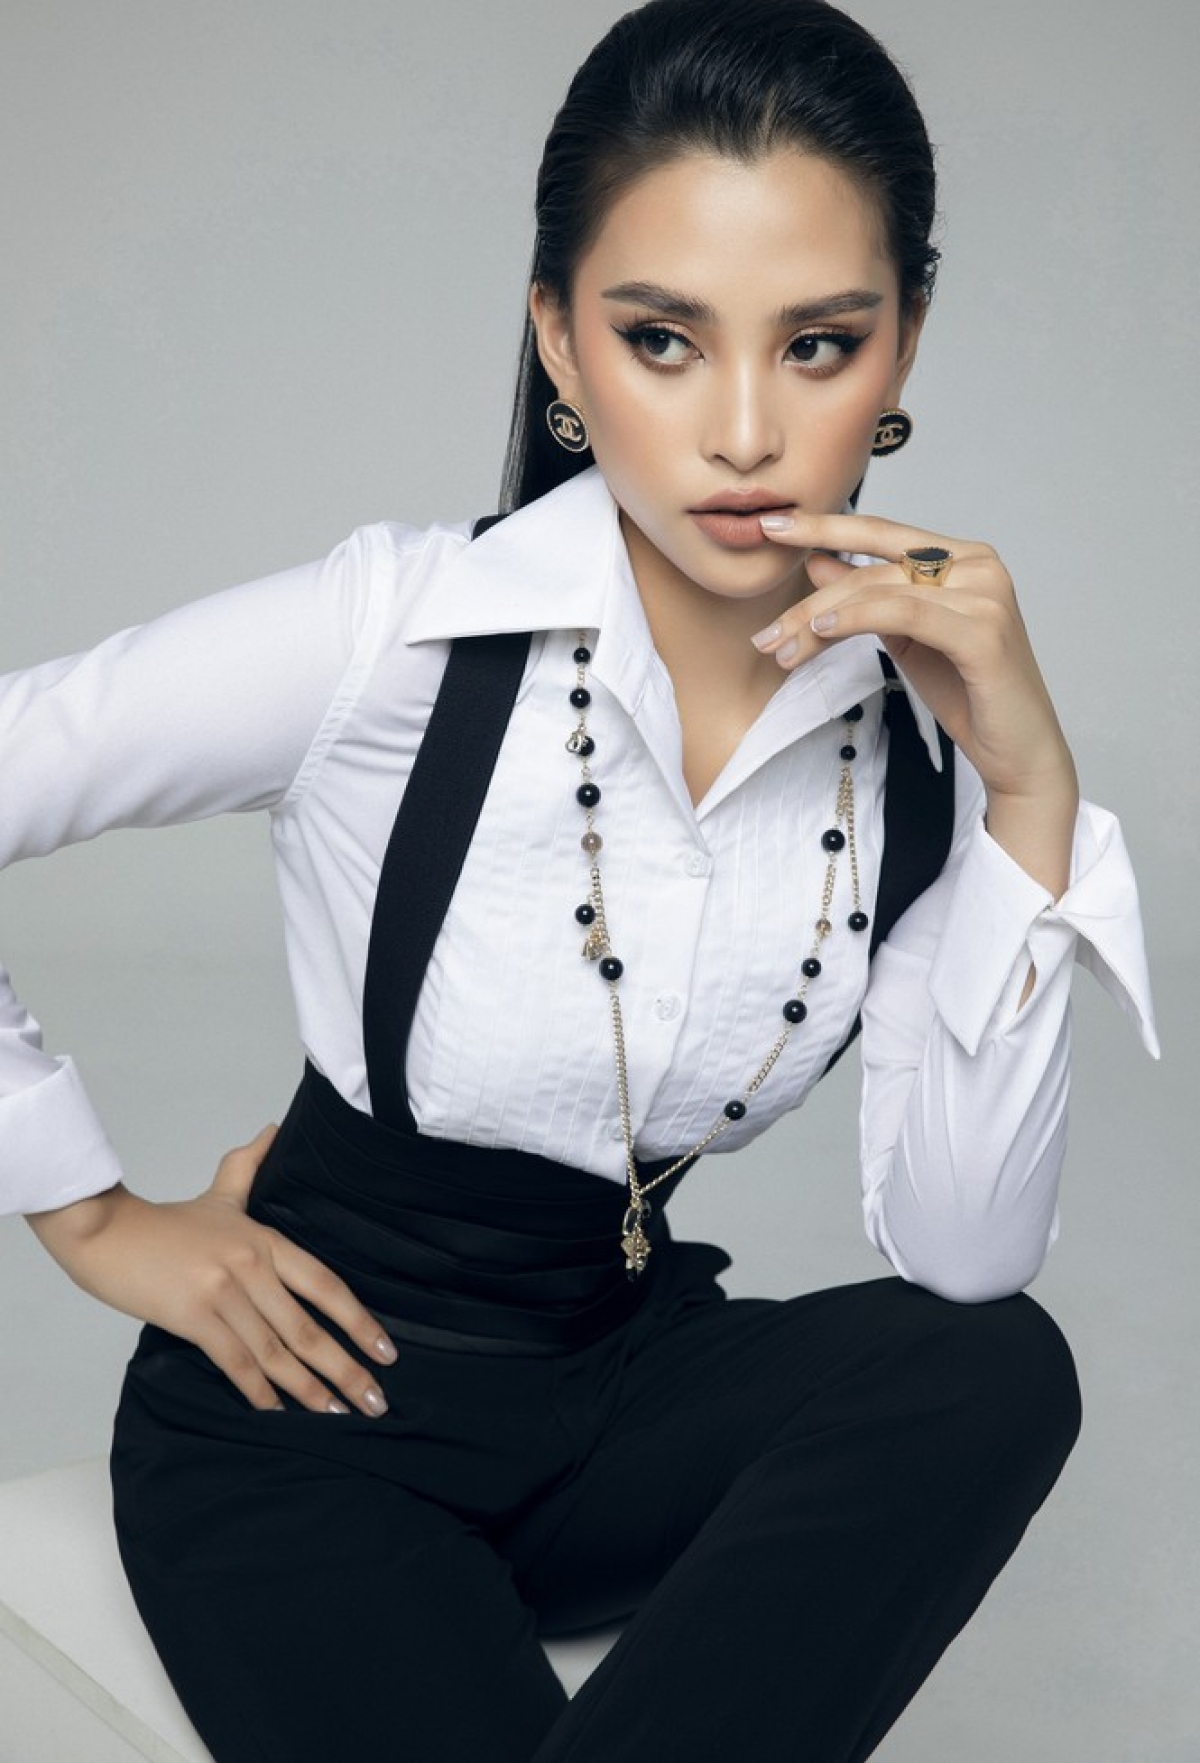 Tieu Vy, a top 30 finisher at Miss World 2018, appears vastly different to normal when appearing in a menswear-style outfit. In the buildup to this year’s pageant, she is serving as an image ambassador for Miss Vietnam.